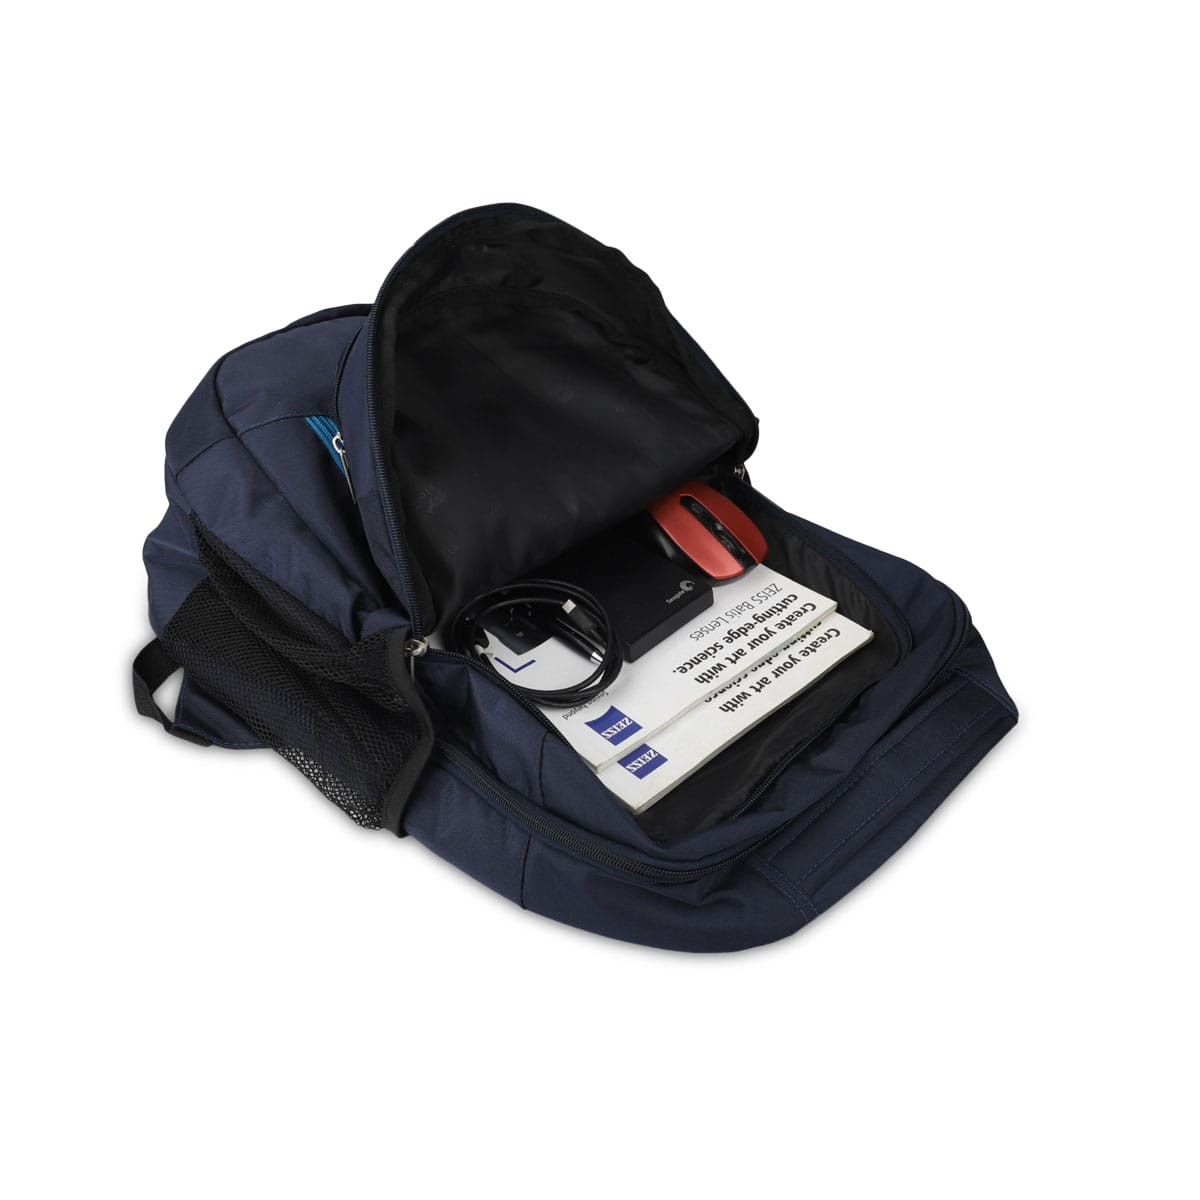 Navy| Protecta Twister Laptop Backpack-4